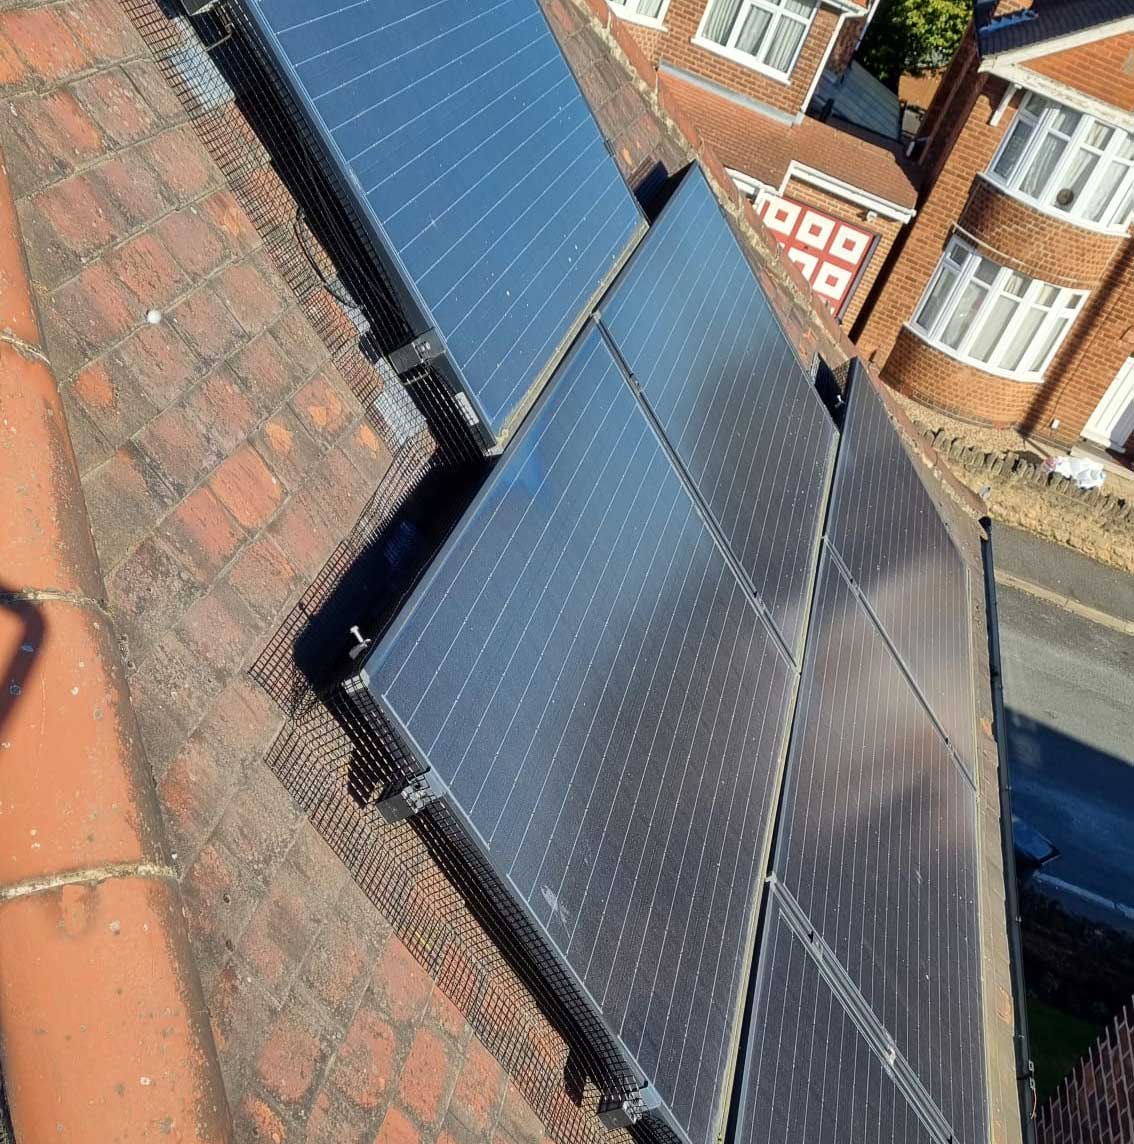 Protecting Solar Panels from Pigeons in Bramcote